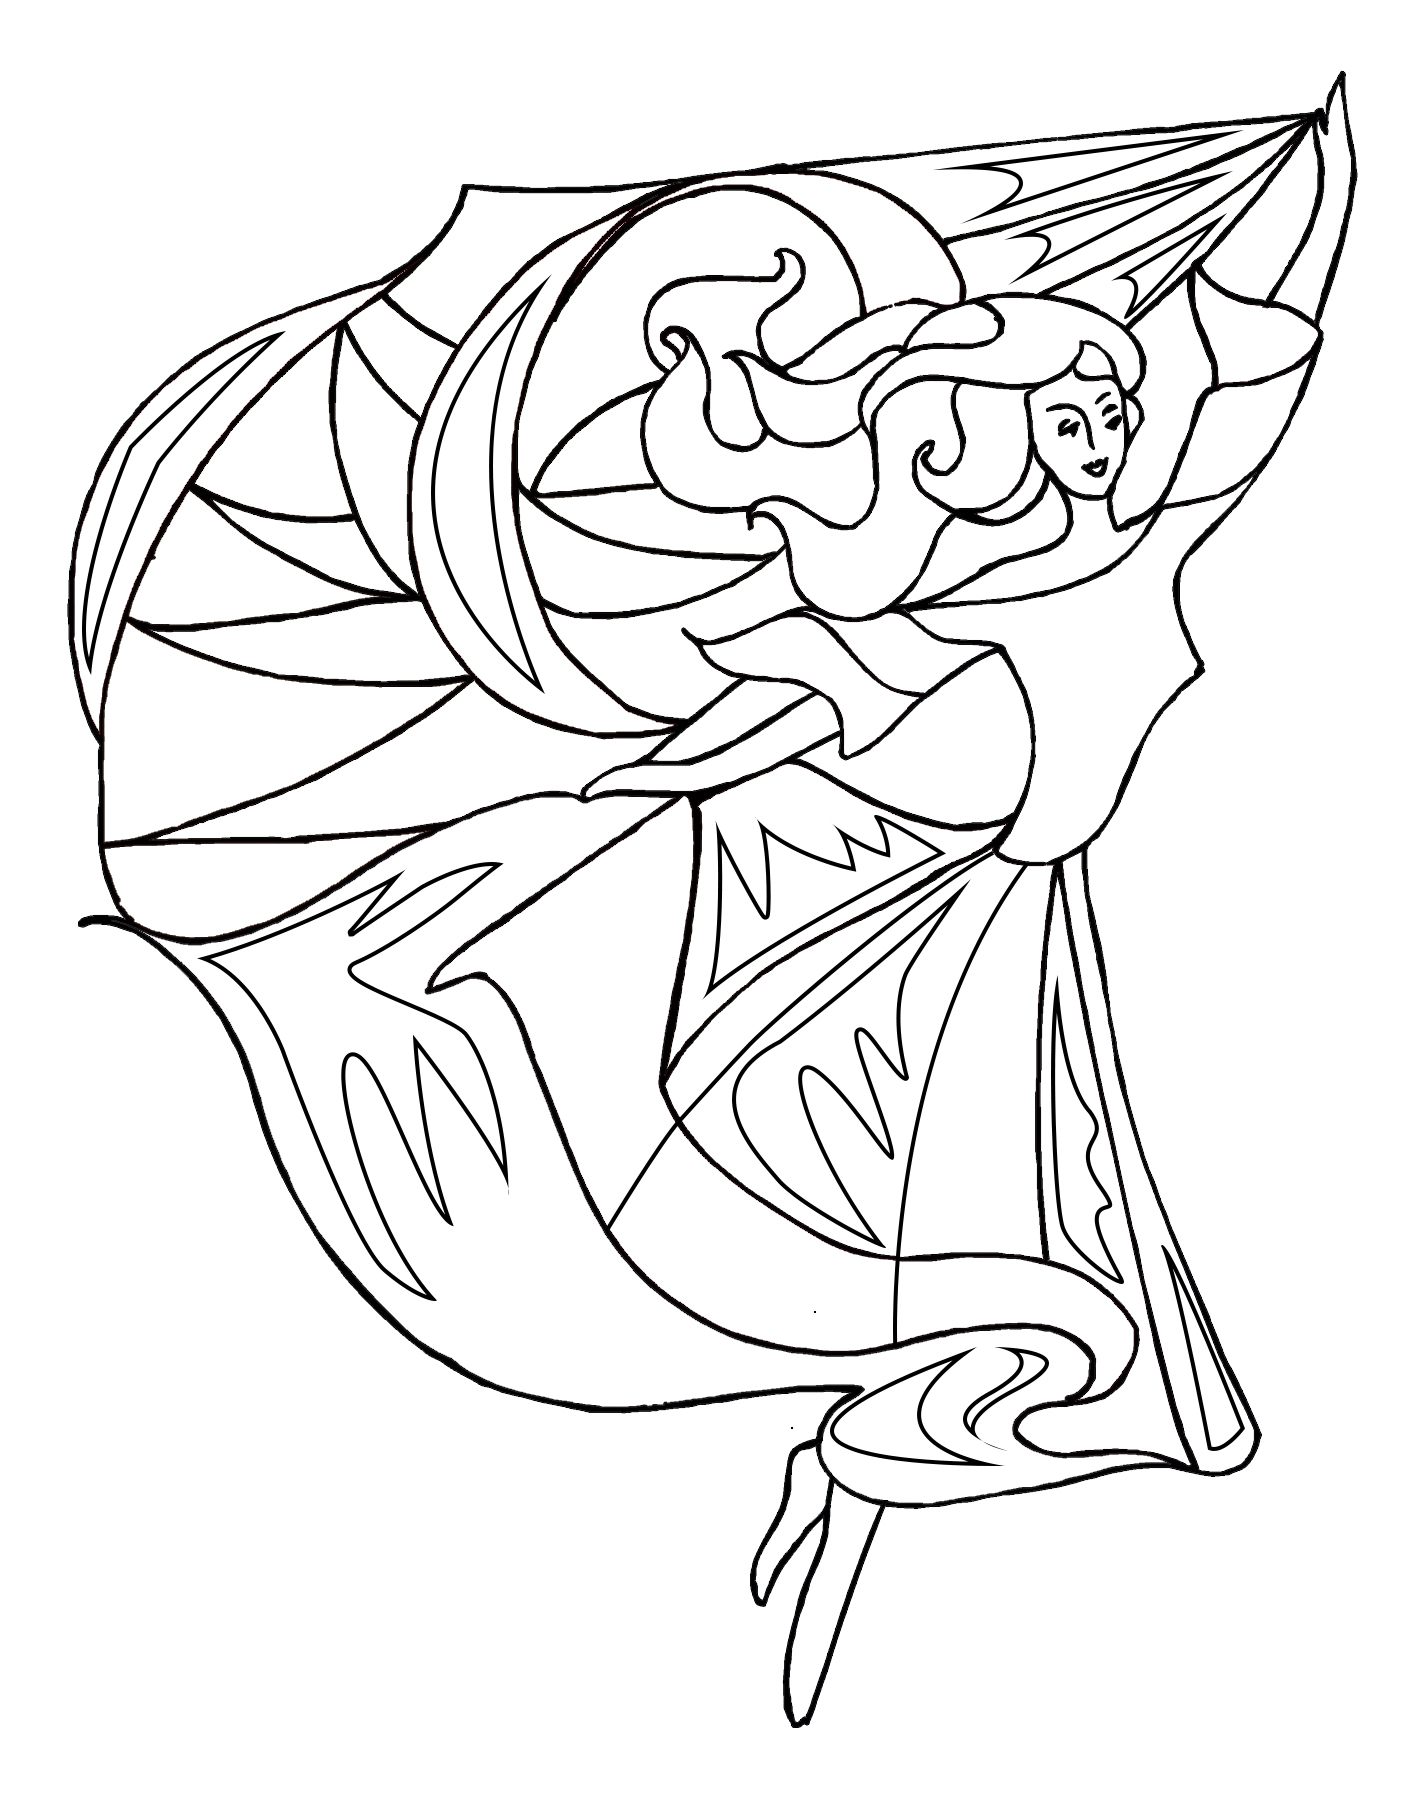 dance coloring page with scarfs